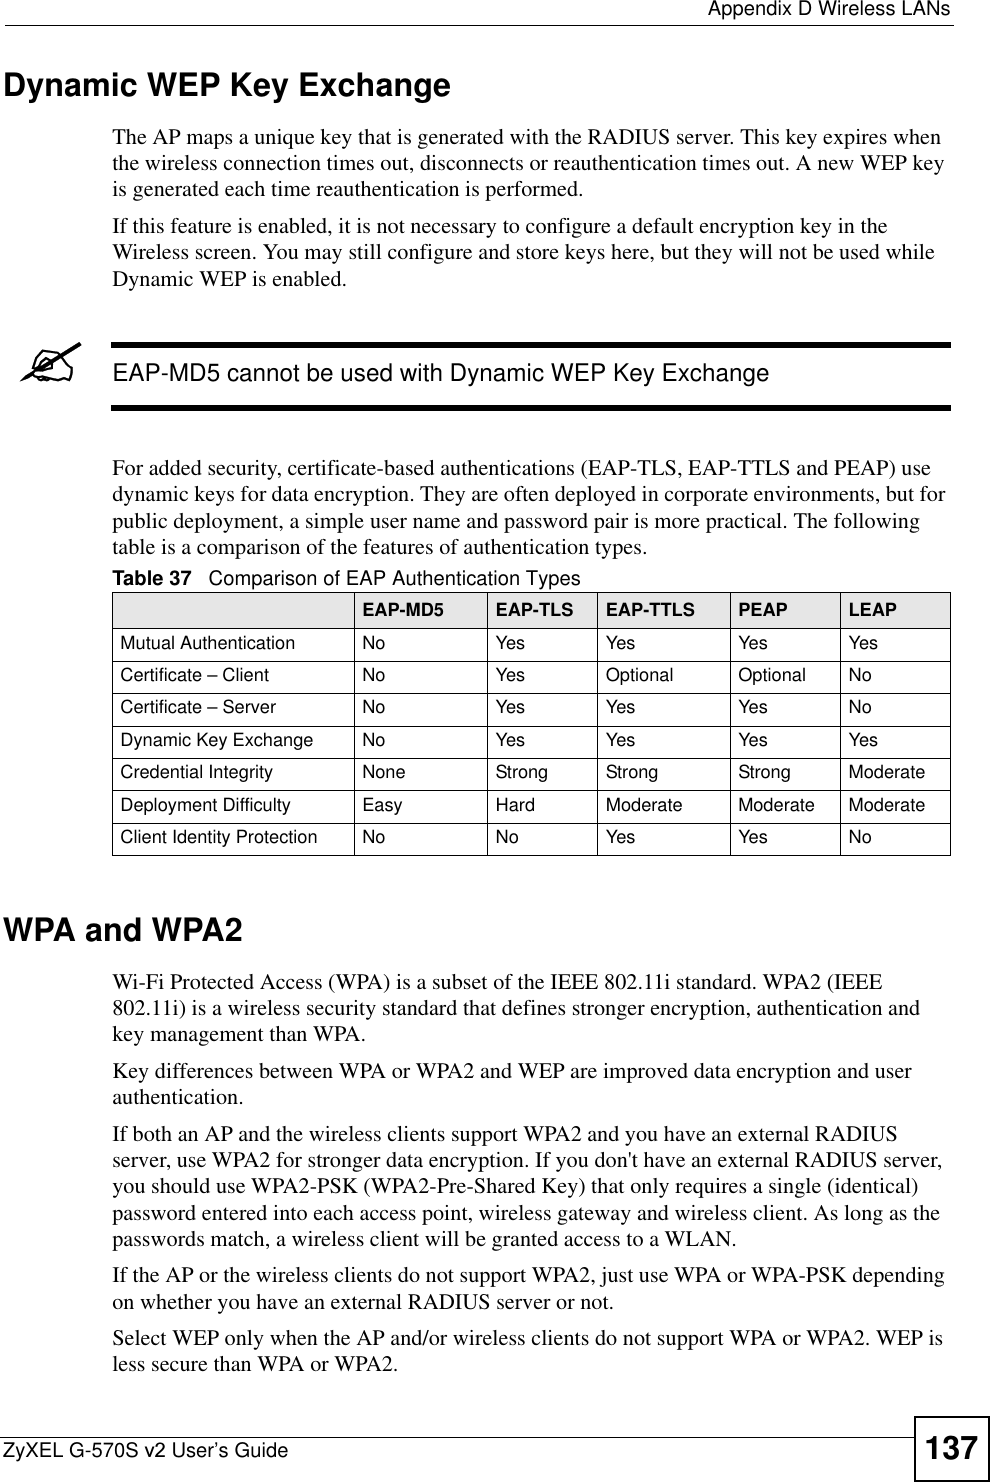  Appendix D Wireless LANsZyXEL G-570S v2 User’s Guide 137Dynamic WEP Key ExchangeThe AP maps a unique key that is generated with the RADIUS server. This key expires when the wireless connection times out, disconnects or reauthentication times out. A new WEP key is generated each time reauthentication is performed.If this feature is enabled, it is not necessary to configure a default encryption key in the Wireless screen. You may still configure and store keys here, but they will not be used while Dynamic WEP is enabled.&quot;EAP-MD5 cannot be used with Dynamic WEP Key ExchangeFor added security, certificate-based authentications (EAP-TLS, EAP-TTLS and PEAP) use dynamic keys for data encryption. They are often deployed in corporate environments, but for public deployment, a simple user name and password pair is more practical. The following table is a comparison of the features of authentication types.WPA and WPA2Wi-Fi Protected Access (WPA) is a subset of the IEEE 802.11i standard. WPA2 (IEEE 802.11i) is a wireless security standard that defines stronger encryption, authentication and key management than WPA. Key differences between WPA or WPA2 and WEP are improved data encryption and user authentication.If both an AP and the wireless clients support WPA2 and you have an external RADIUS server, use WPA2 for stronger data encryption. If you don&apos;t have an external RADIUS server, you should use WPA2-PSK (WPA2-Pre-Shared Key) that only requires a single (identical) password entered into each access point, wireless gateway and wireless client. As long as the passwords match, a wireless client will be granted access to a WLAN. If the AP or the wireless clients do not support WPA2, just use WPA or WPA-PSK depending on whether you have an external RADIUS server or not.Select WEP only when the AP and/or wireless clients do not support WPA or WPA2. WEP is less secure than WPA or WPA2.Table 37   Comparison of EAP Authentication TypesEAP-MD5 EAP-TLS EAP-TTLS PEAP LEAPMutual Authentication No Yes Yes Yes YesCertificate – Client No Yes Optional Optional NoCertificate – Server No Yes Yes Yes NoDynamic Key Exchange No Yes Yes Yes YesCredential Integrity None Strong Strong Strong ModerateDeployment Difficulty Easy Hard Moderate Moderate ModerateClient Identity Protection No No Yes Yes No